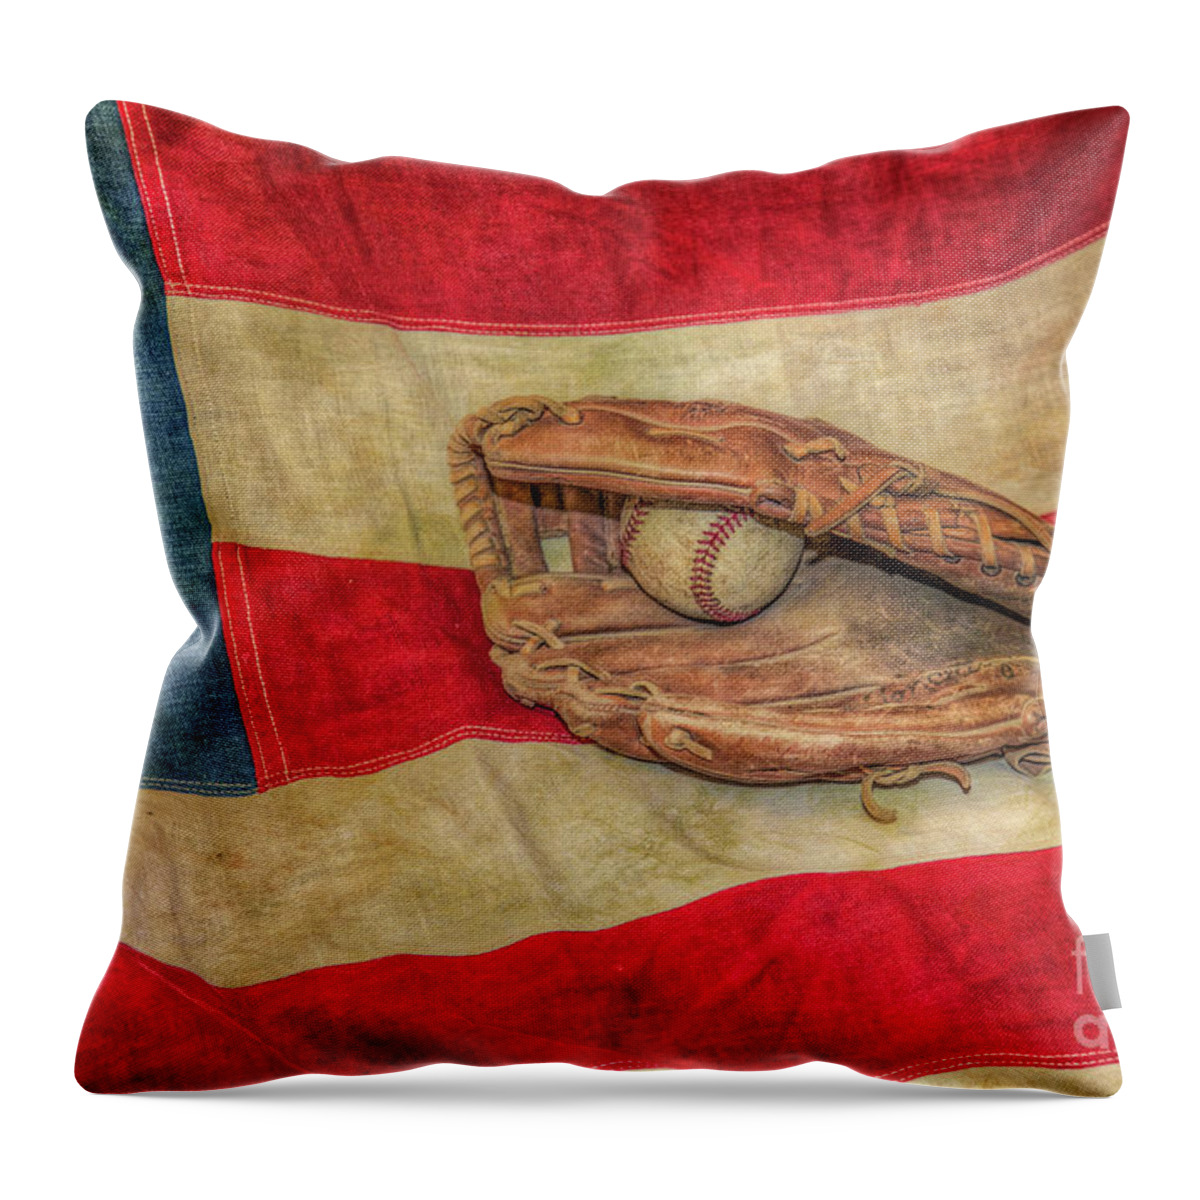 Baseball Glove And Ball On Us Flag Throw Pillow featuring the photograph Baseball Glove and Ball on US Flag by Randy Steele